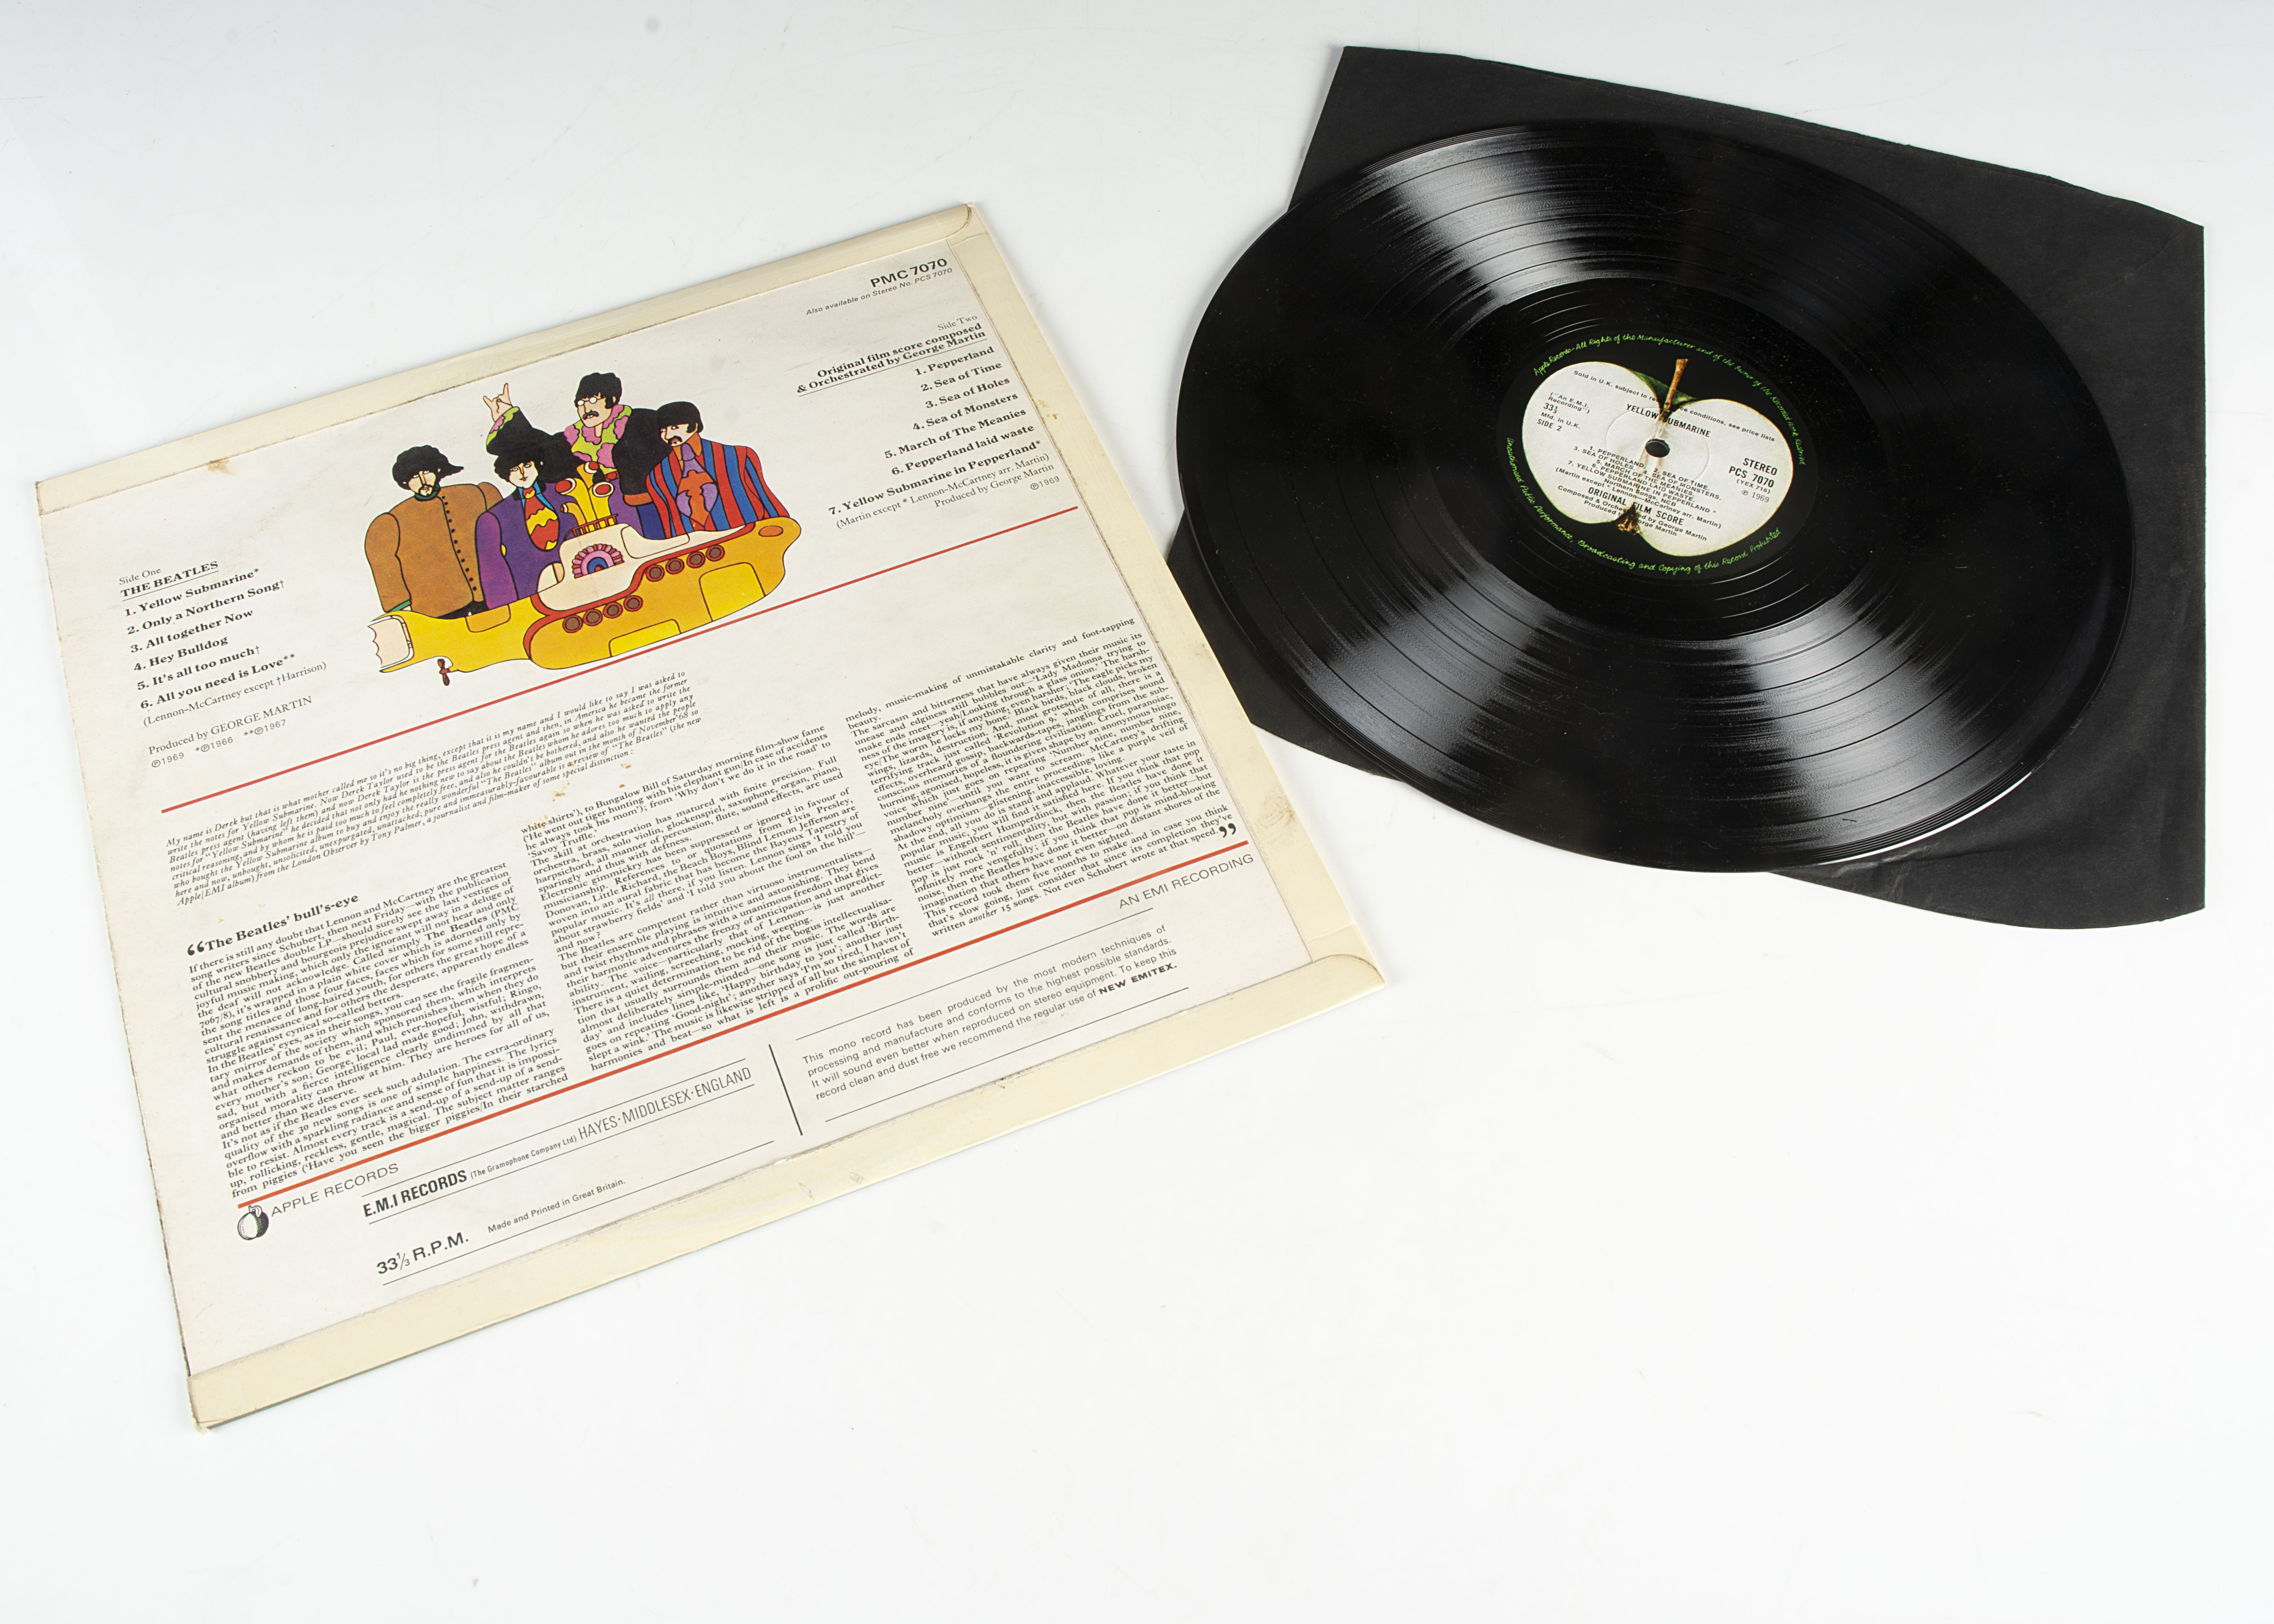 The Beatles LP, Yellow Submarine LP - Mono Sleeve / Stereo Vinyl - UK First Press release on Apple - Image 2 of 2